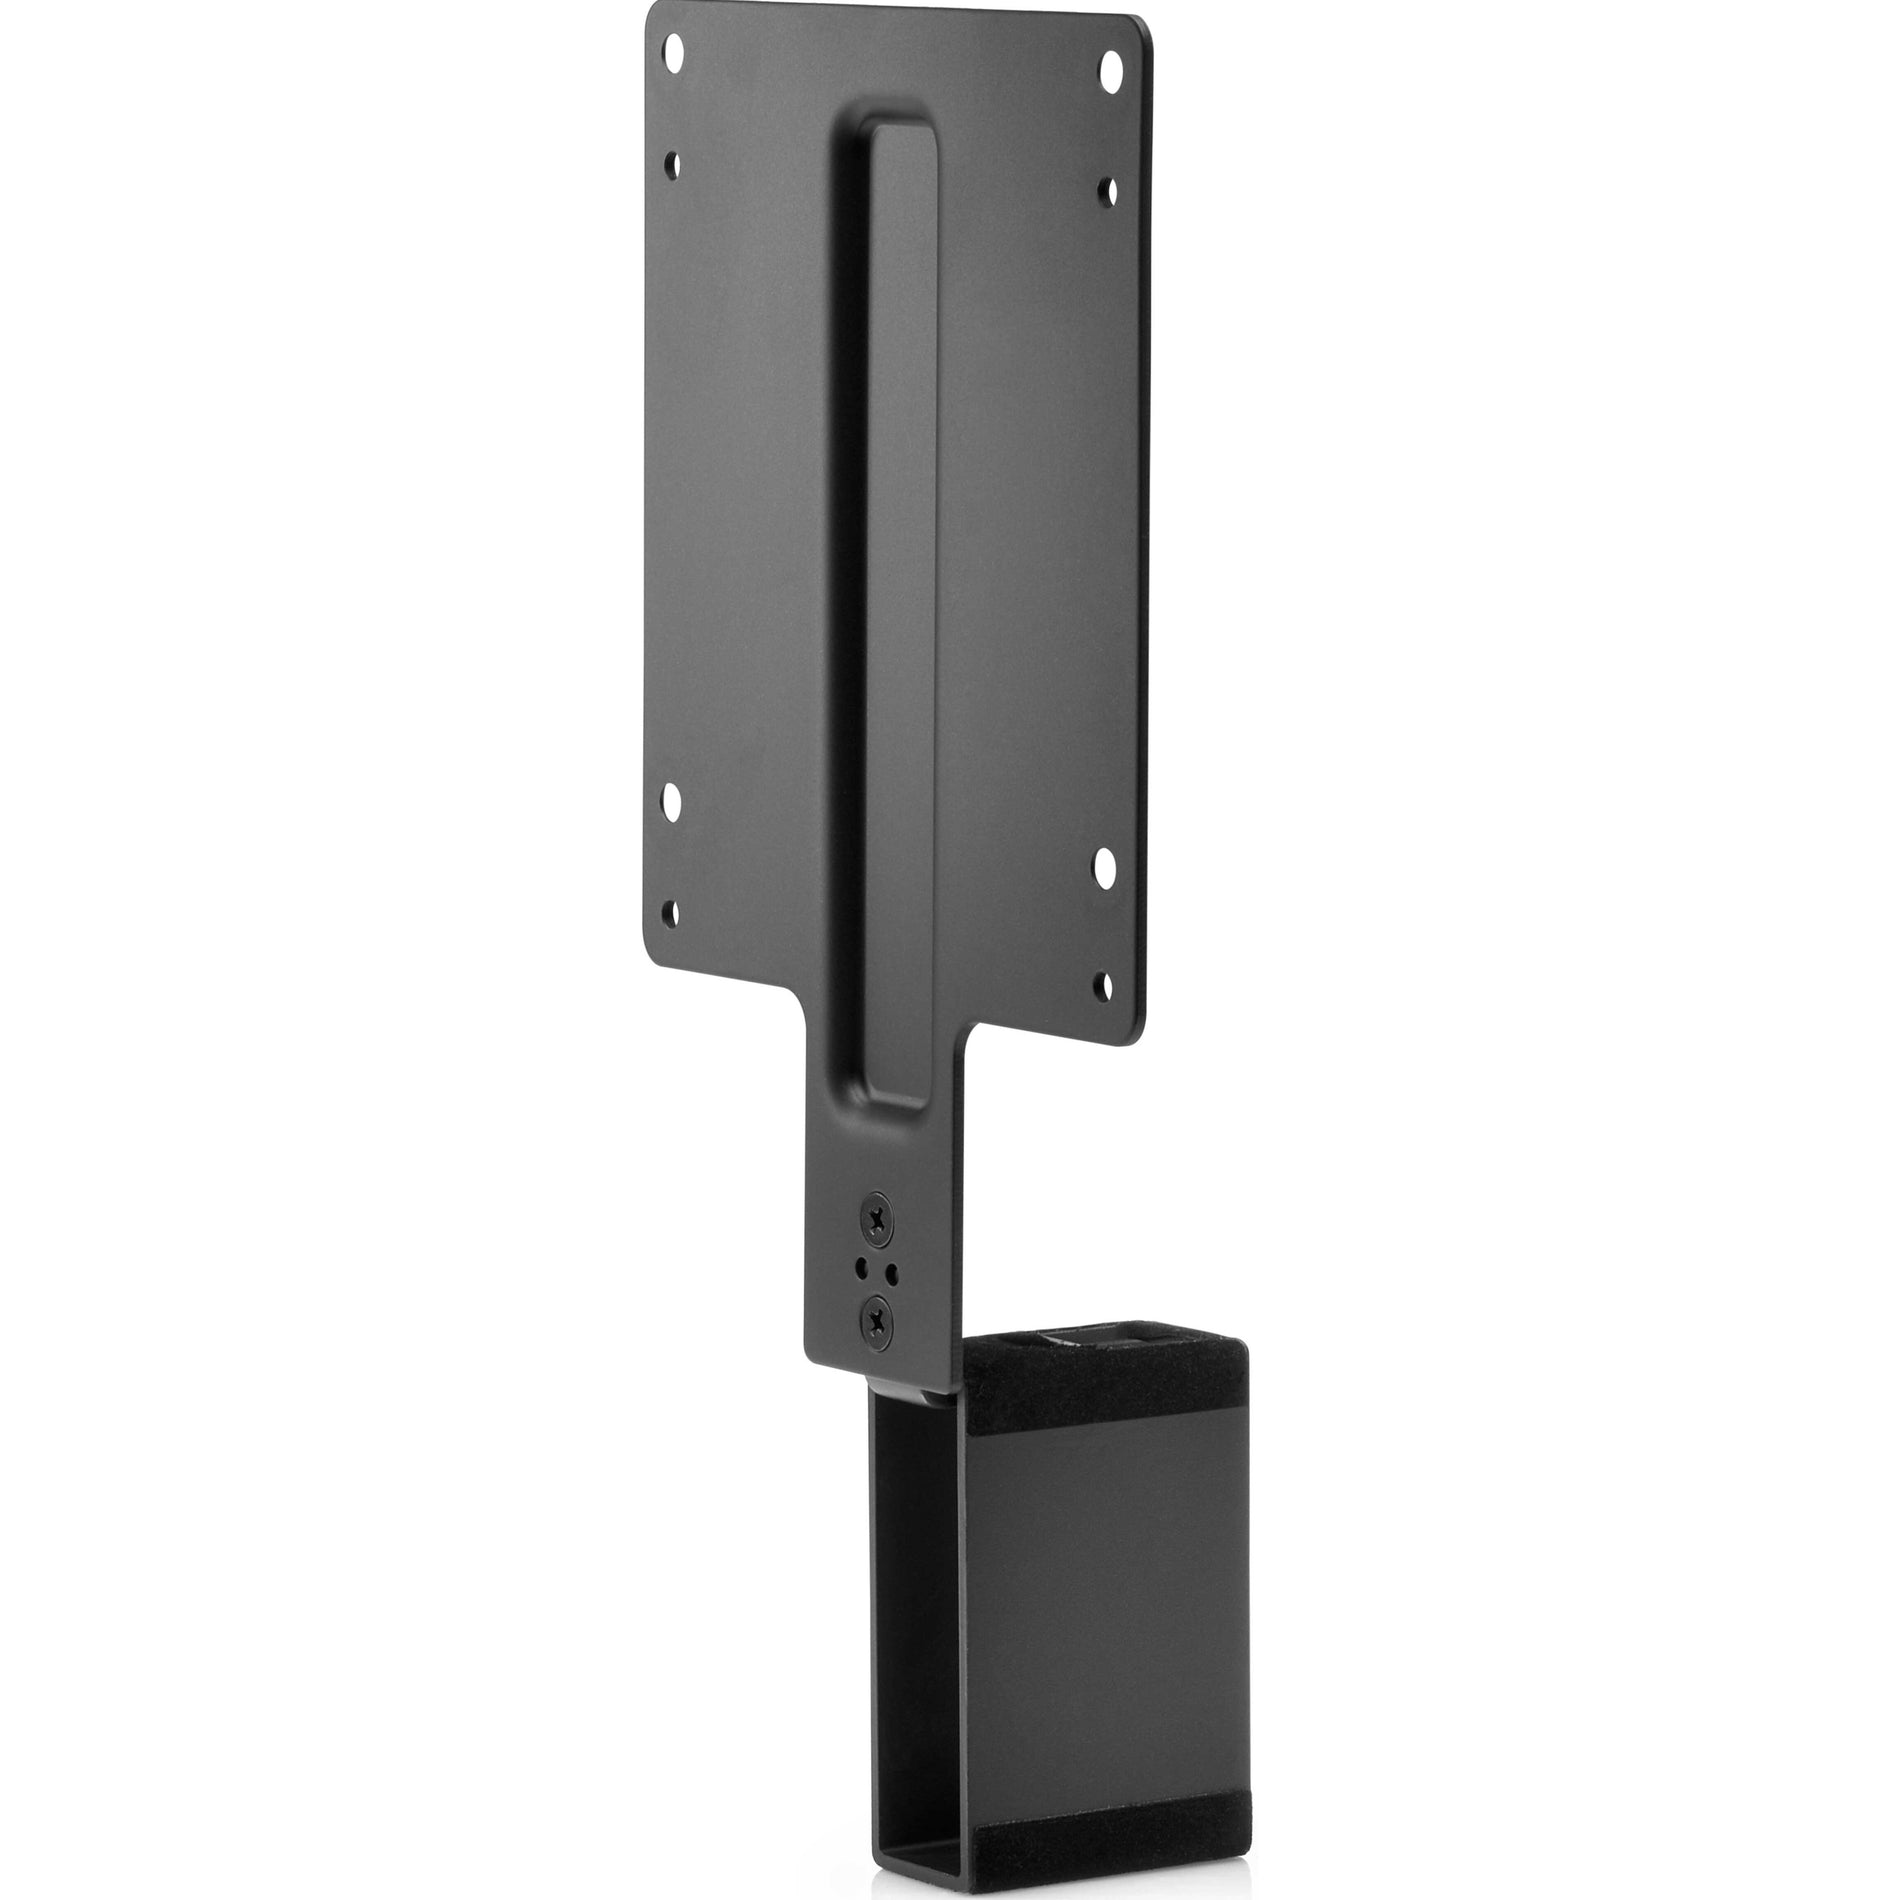 HP 2DW53AT B300 PC Mounting Bracket for Workstation, Mini PC, Thin Client